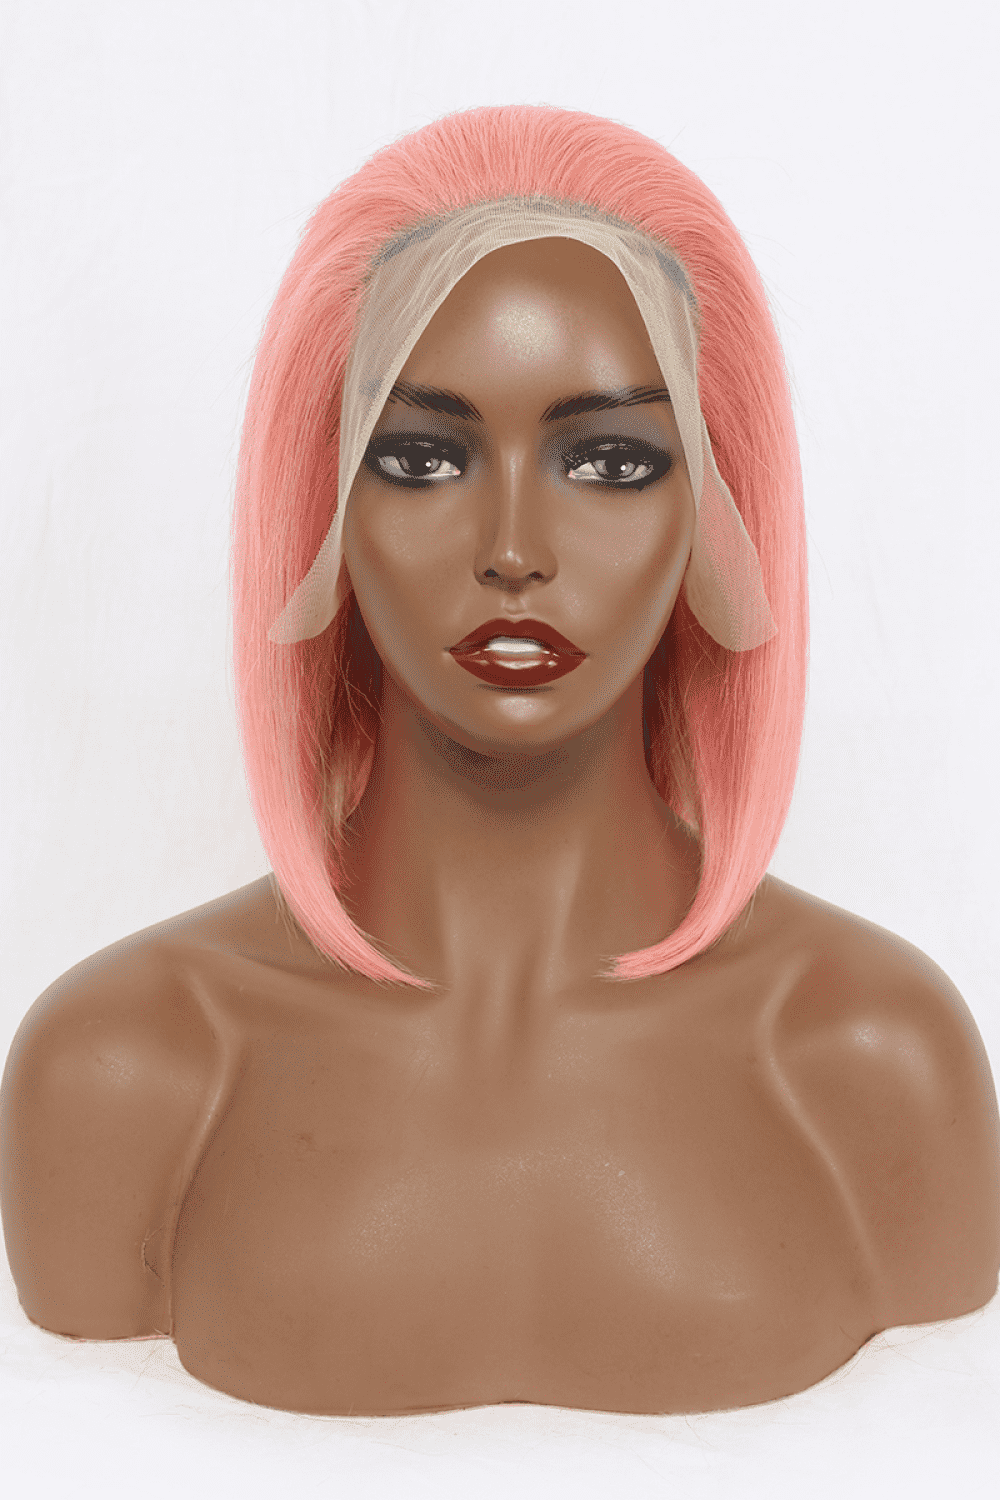 a mannequin head with a pink wig